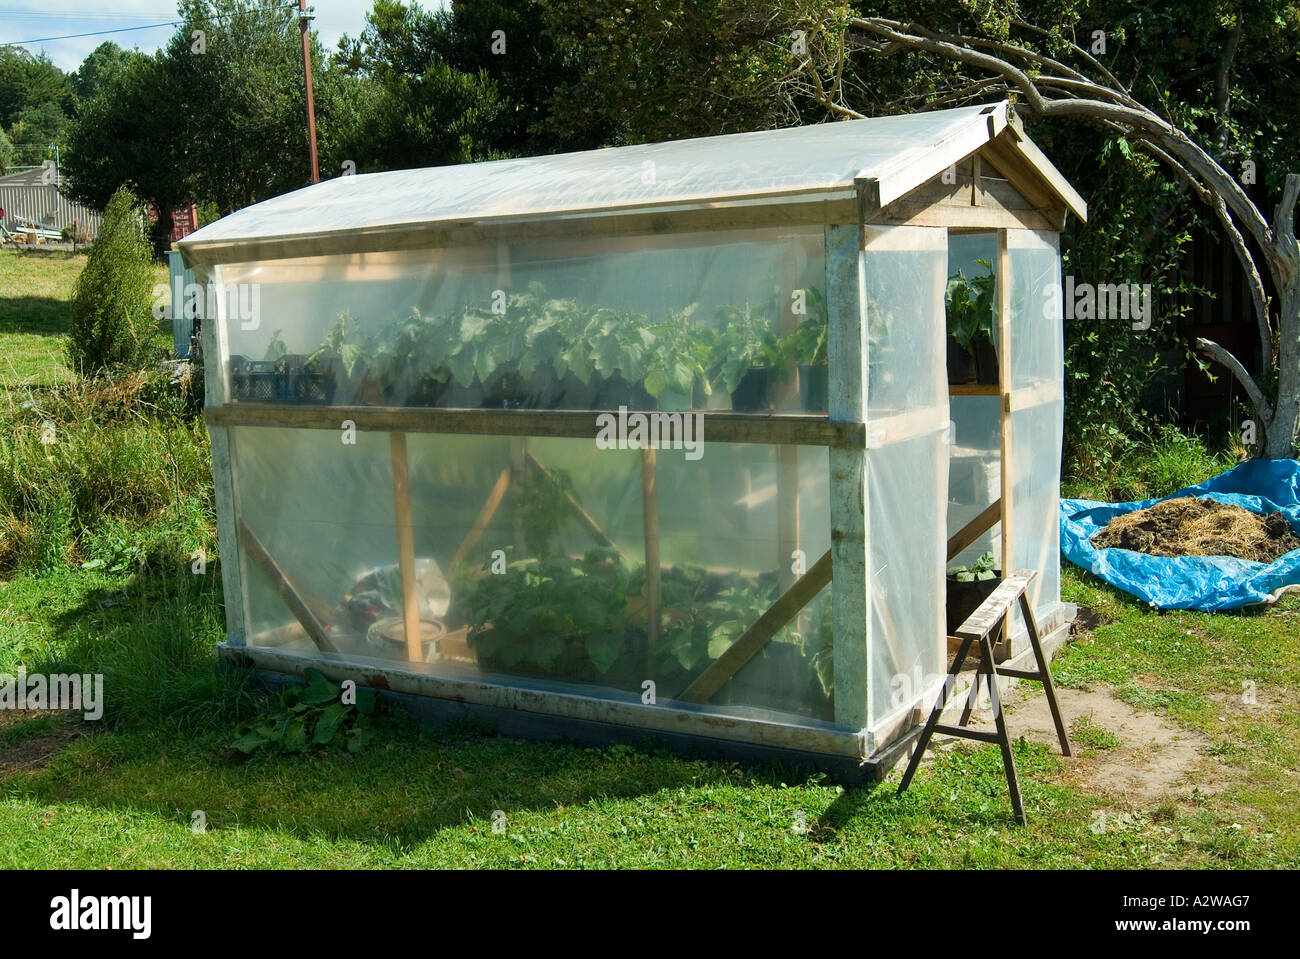 Homemade hot house built using scrap timber and agricultural polythene sheeting Stock Photo